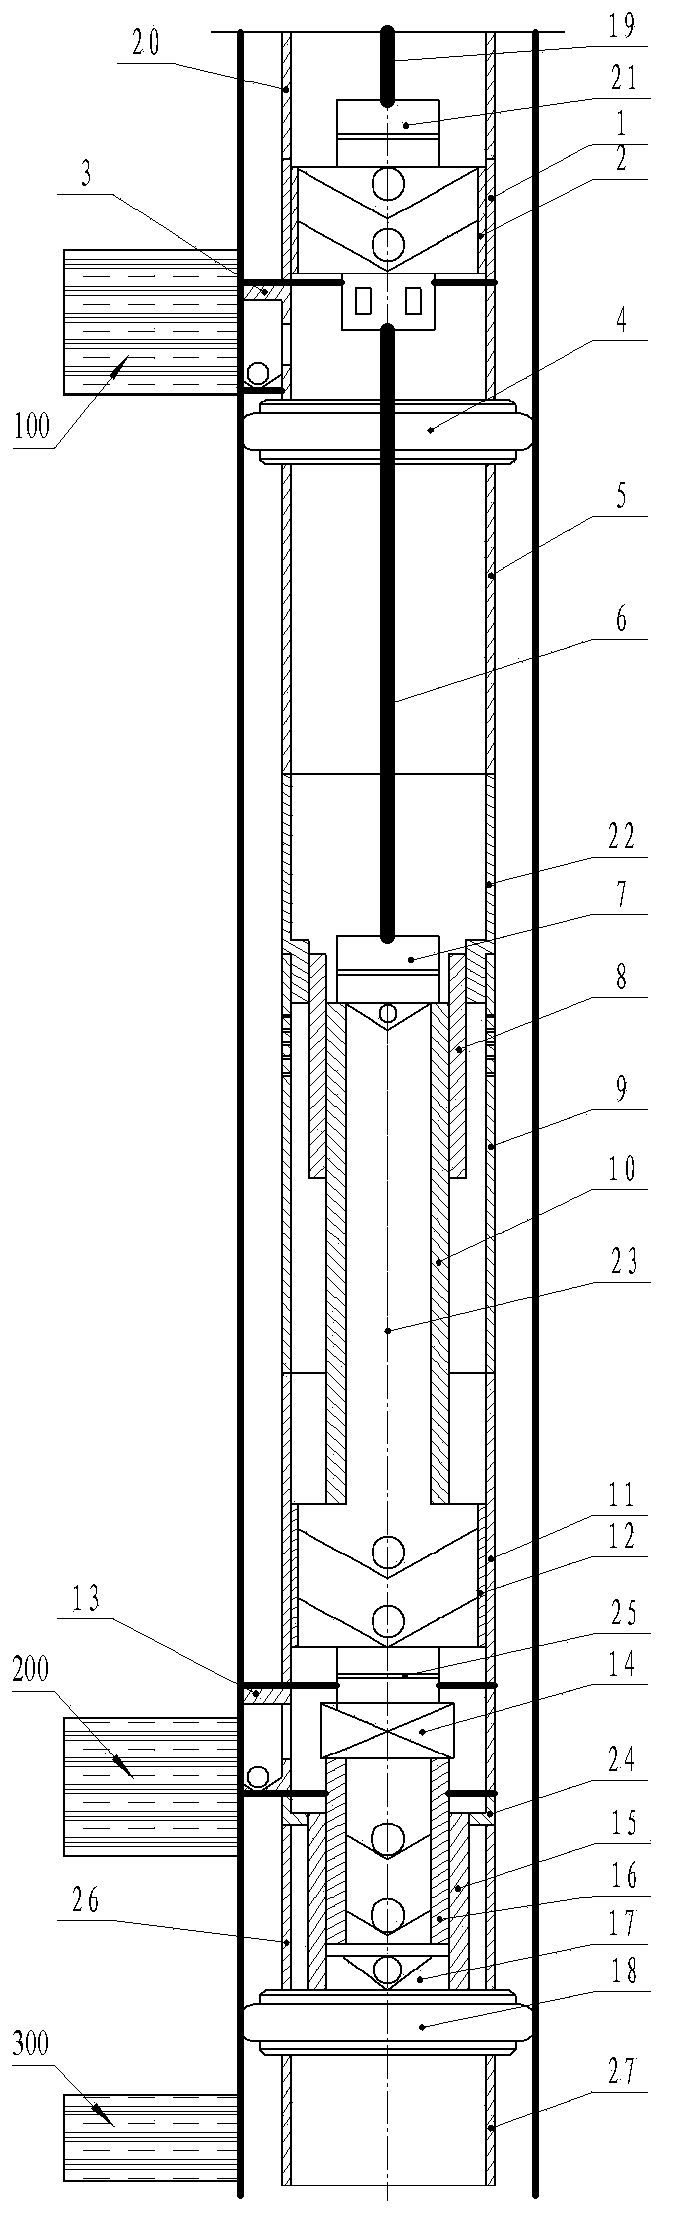 Three-stage layered commingled production string